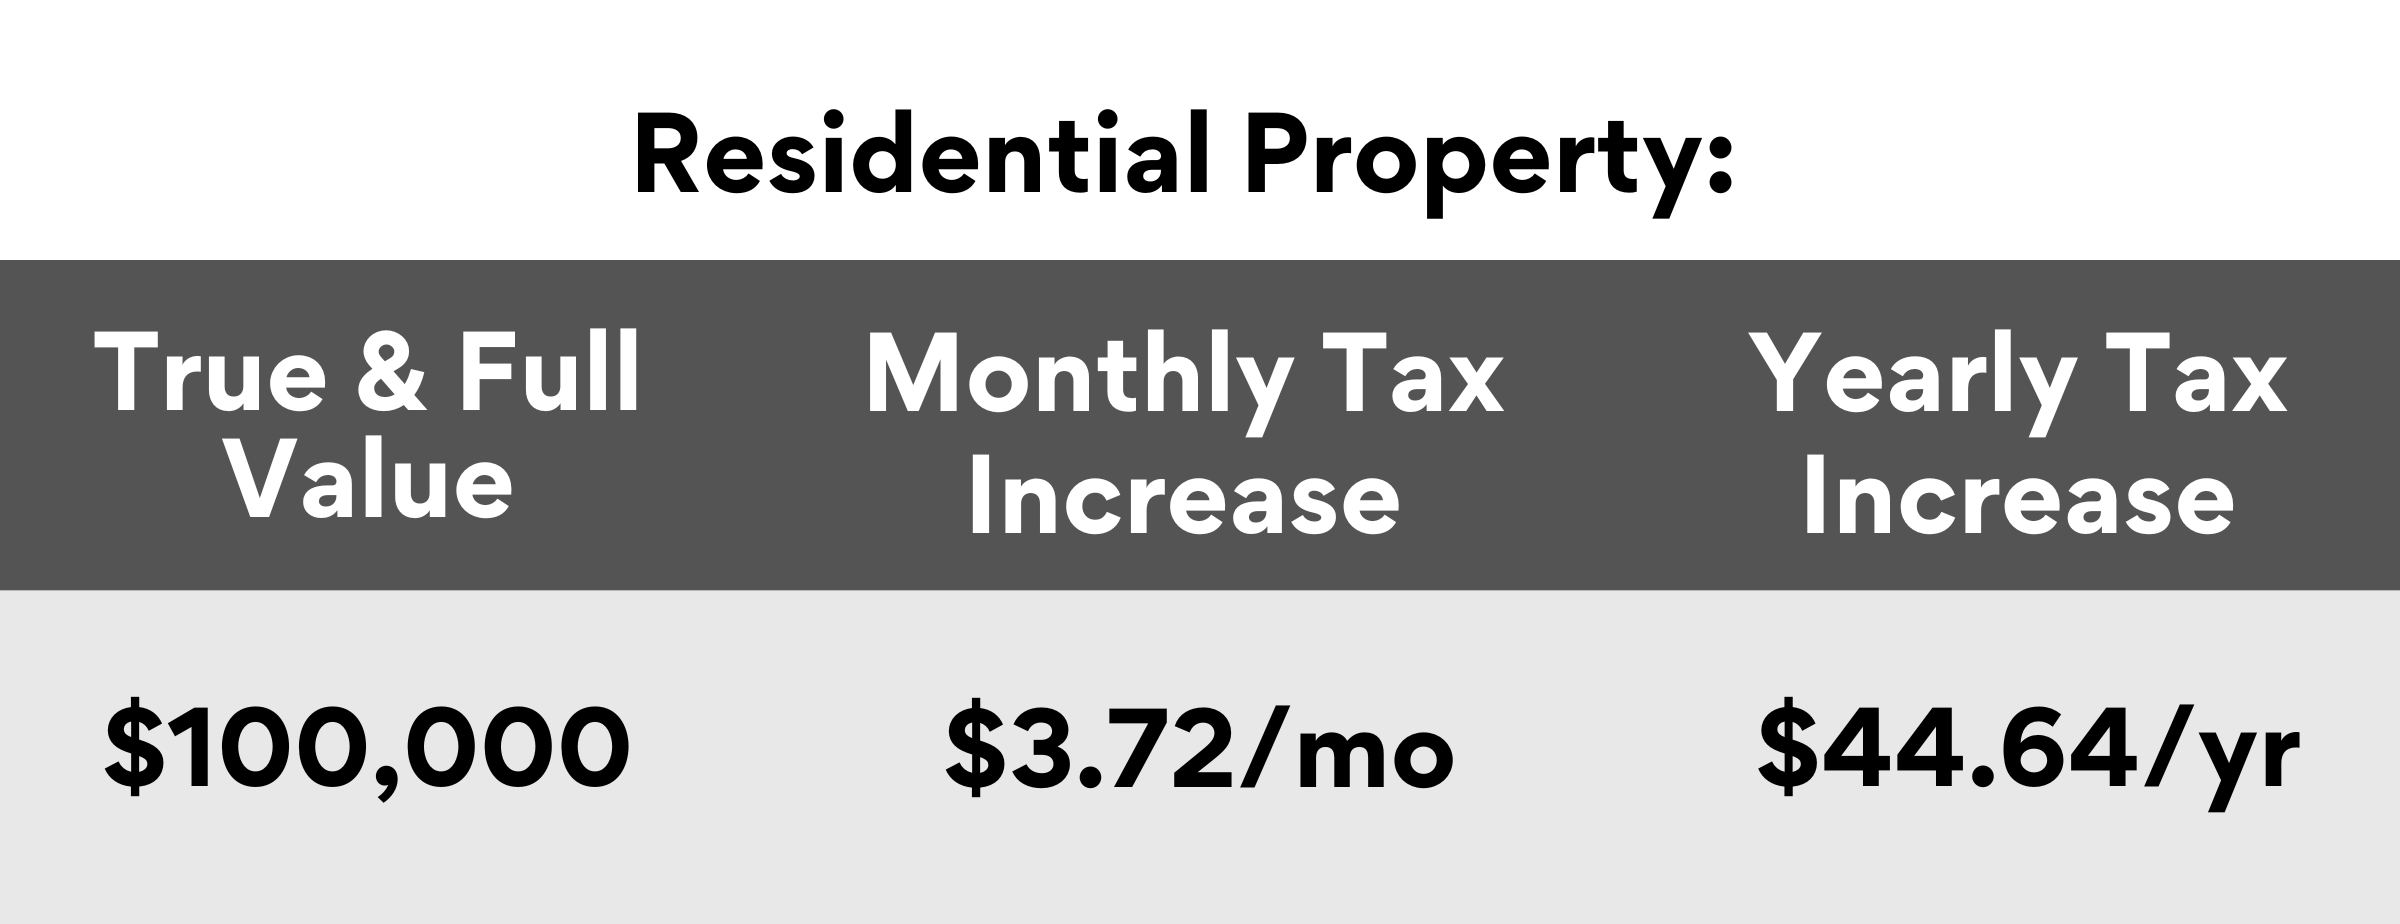 residential tax increase